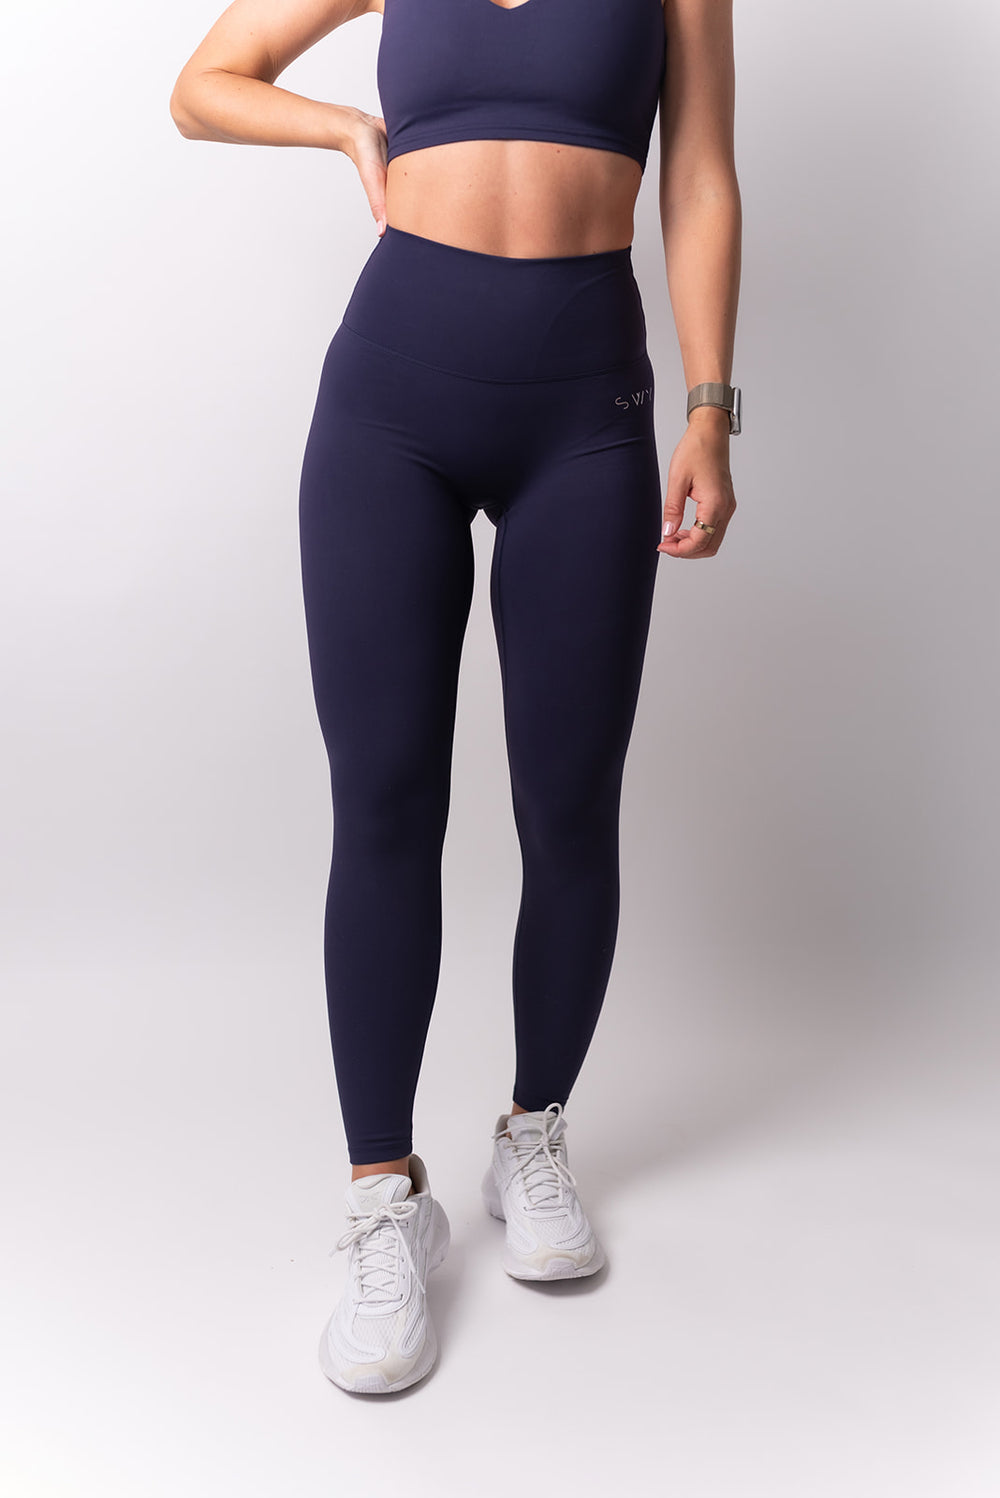 Softline Scrunch Leggings from the Softline collection in blue color designed to emphasise the woman's figure 